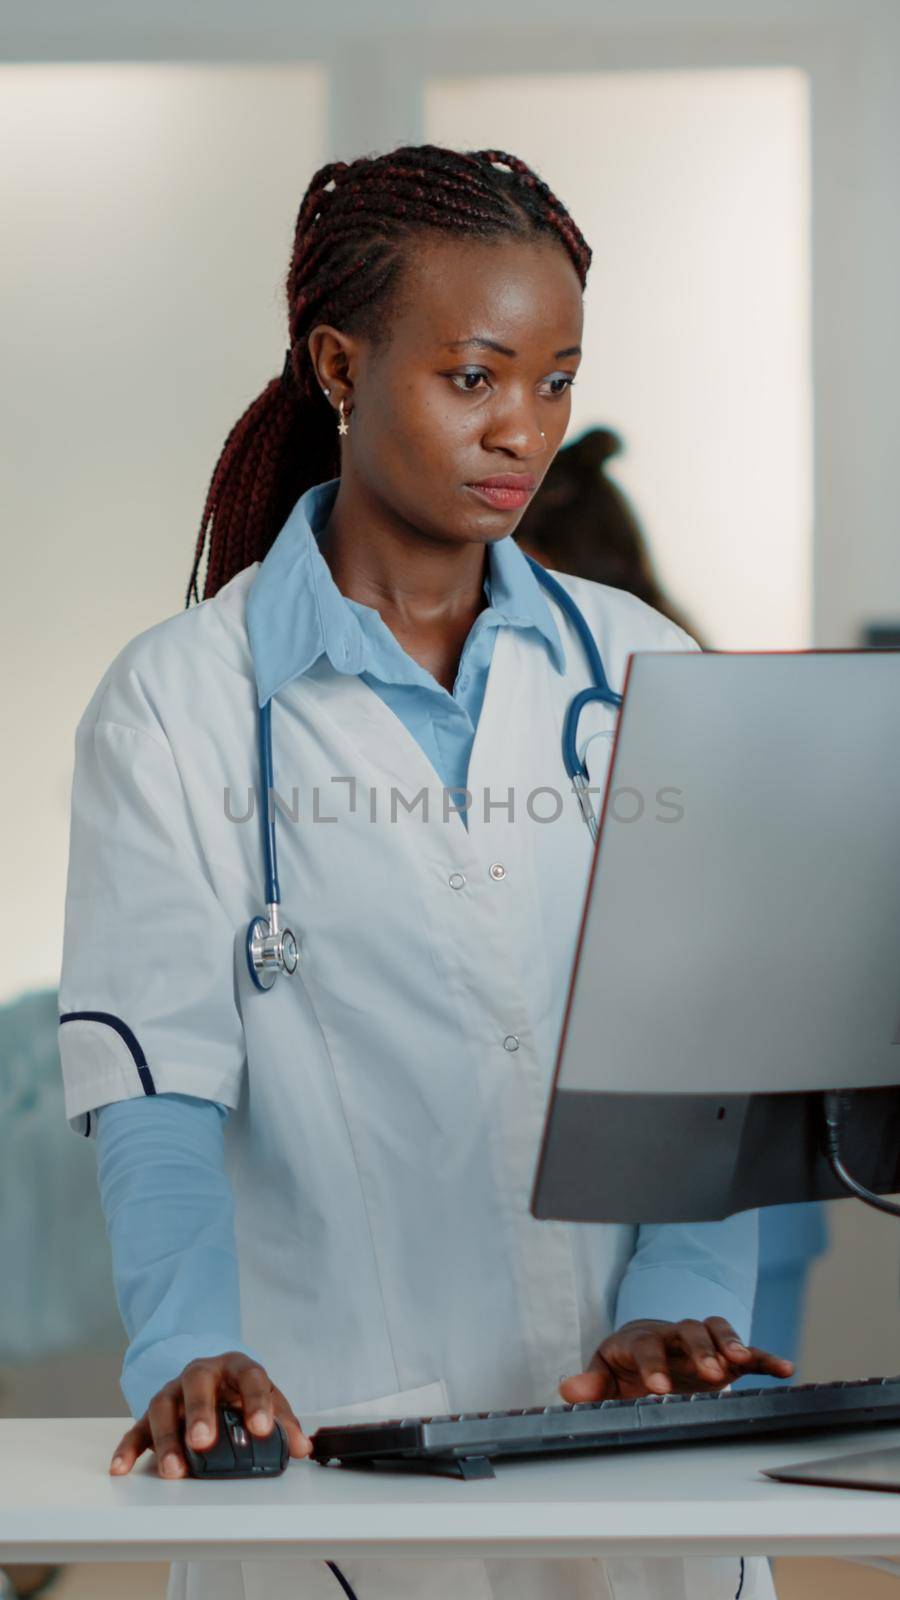 General practitioner with white coat using computer at desk by DCStudio